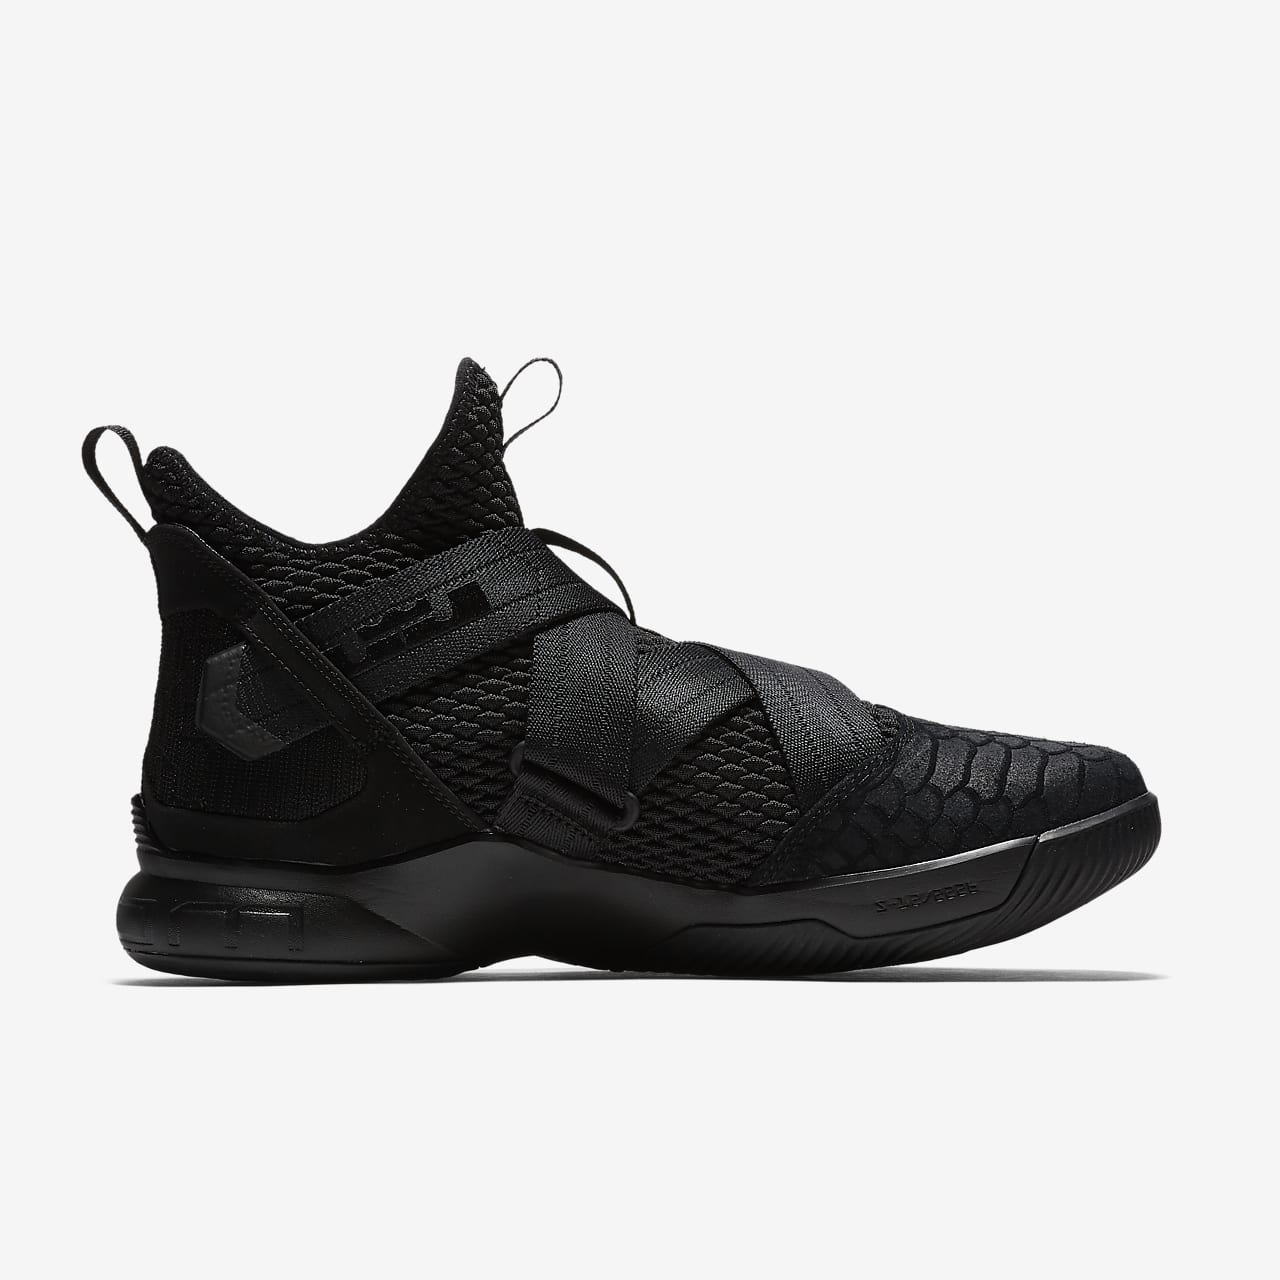 lebron soldier xii sfg ep